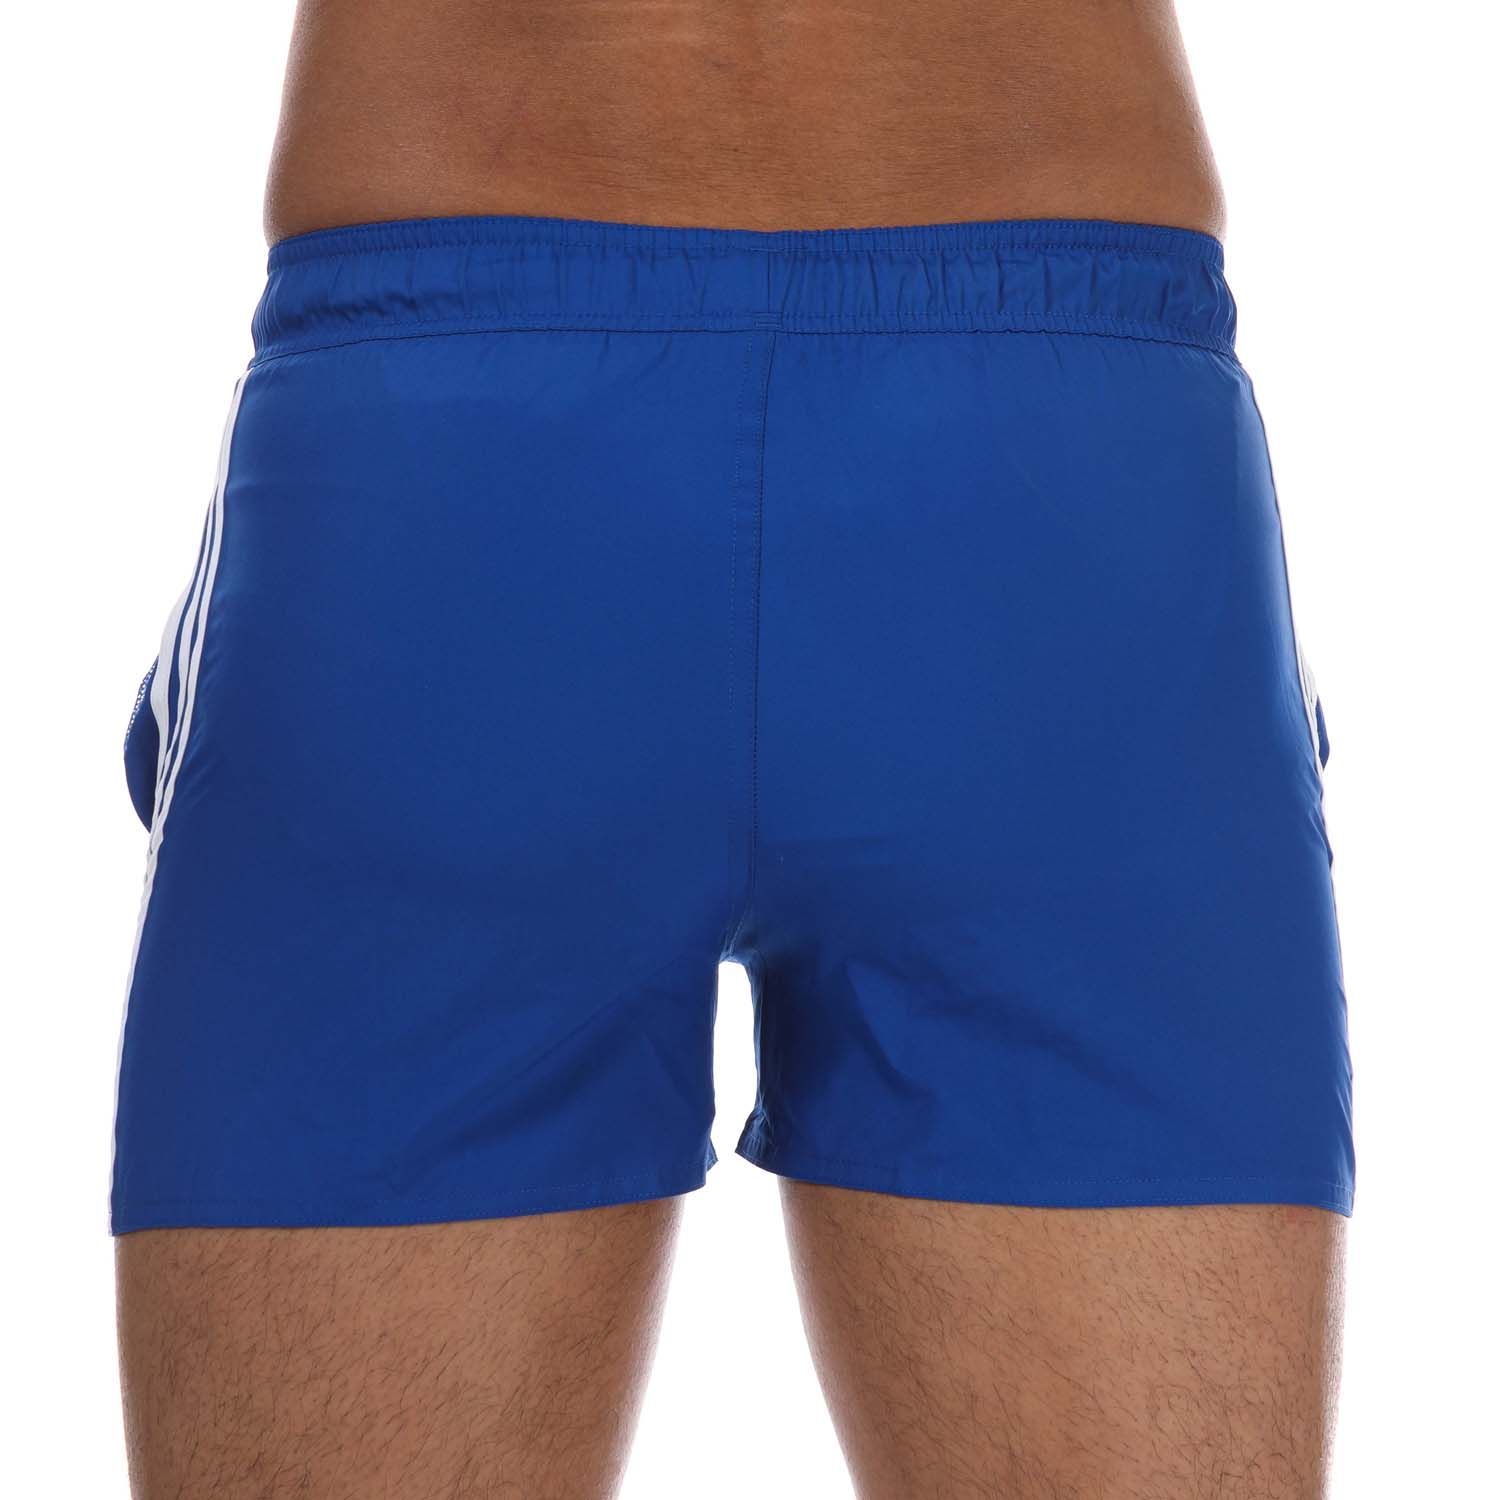 Mens adidas 3-Stripes CLX Swim Shorts in royal blue.- Drawcord on elastic waist.- Side pockets.- Mesh inner briefs.- Quick-drying.- 3-Stripes to sides.- Main Material: 100% Polyester (Recycled). Inner Brief: 100% Polyester (Recycled). - Ref: FJ3365